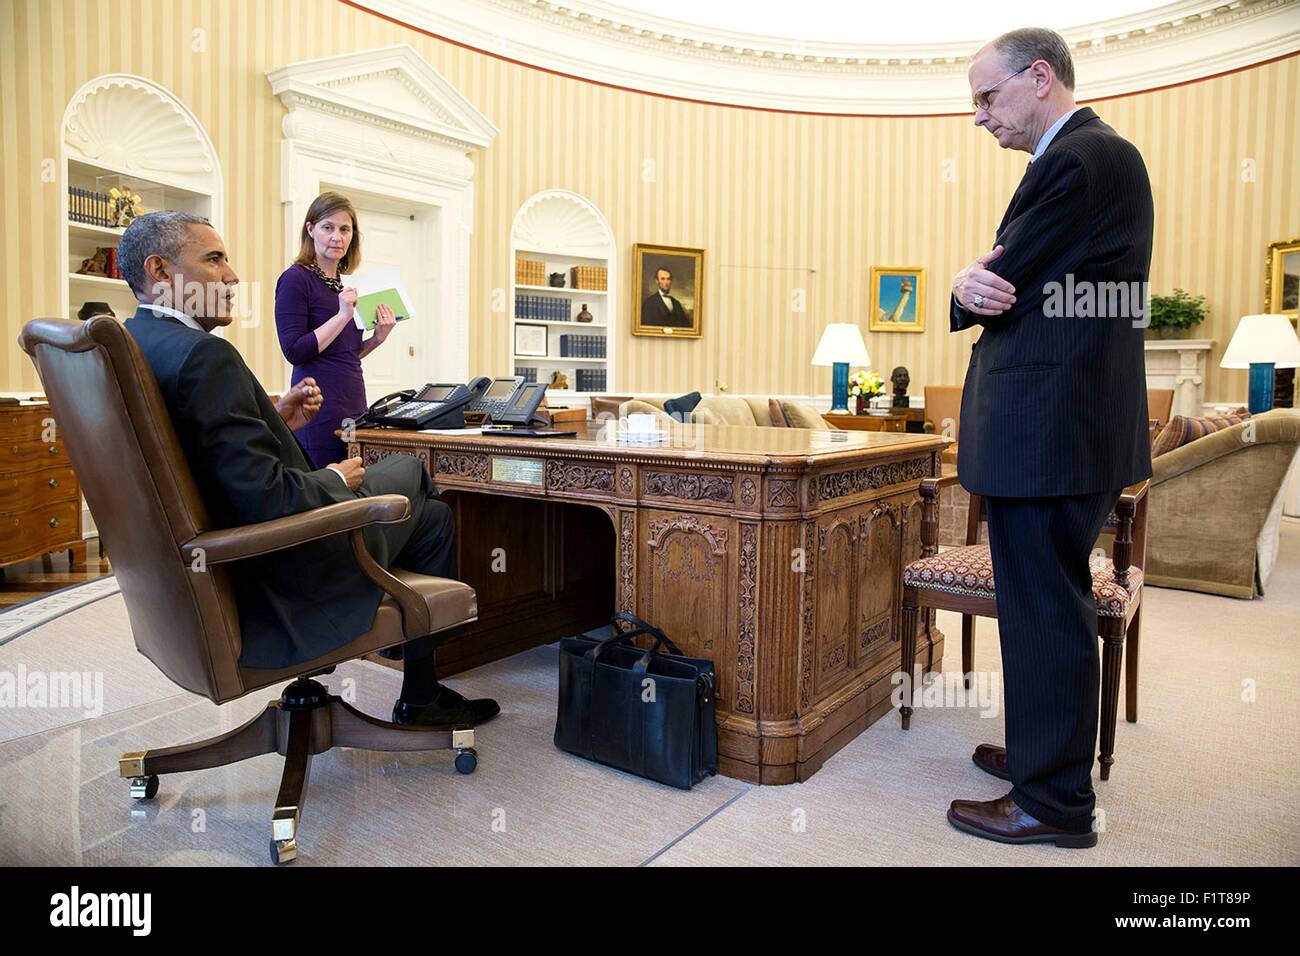 U.S. President Barack Obama meets with with Amy Rosenbaum, Deputy Assistant to the President for Legislative Affairs and Martin Paone, Deputy Assistant to the President for Legislative Affairs in the Oval Office of the White House April 20, 2015 in Washington, DC. Stock Photo